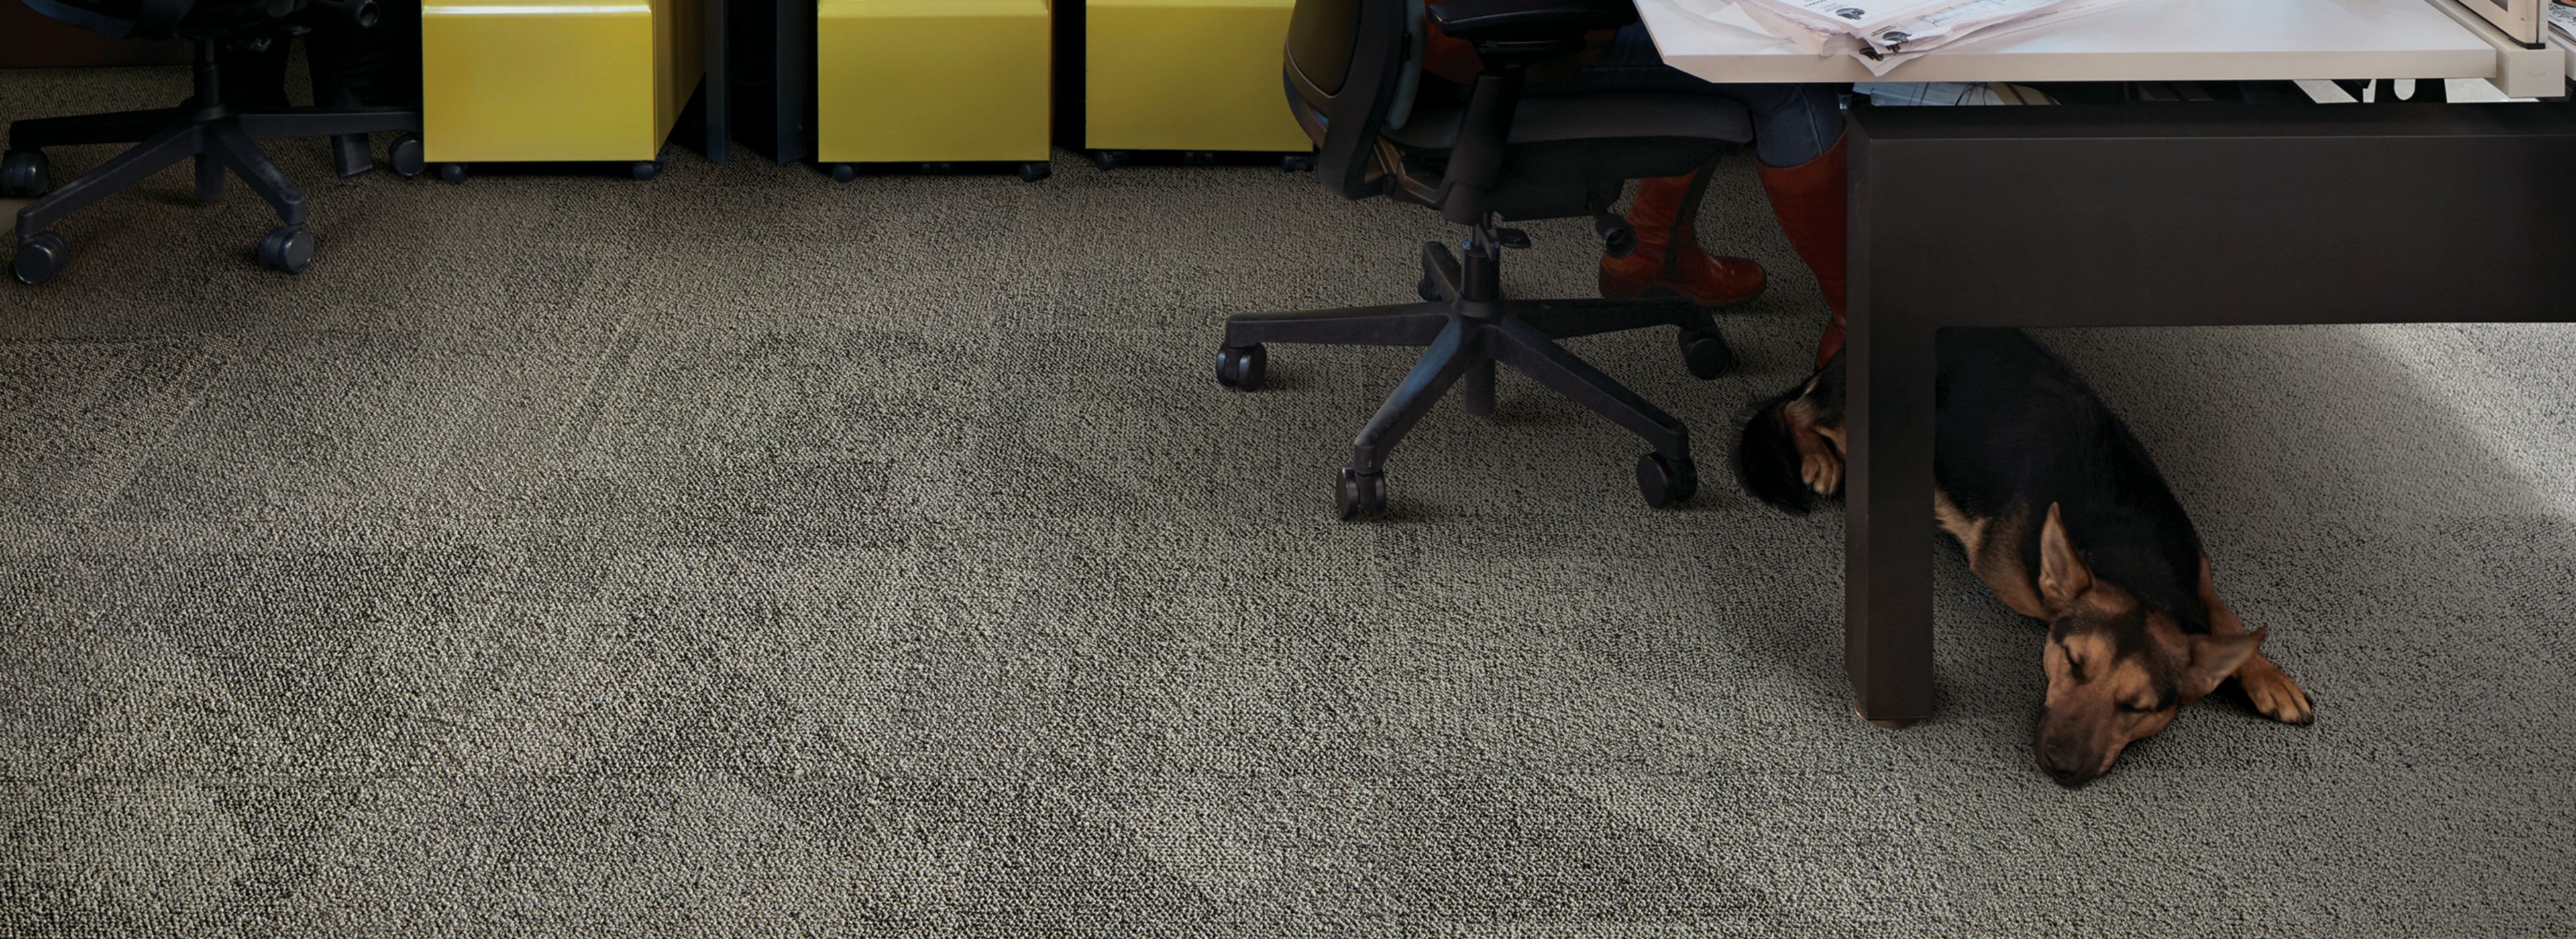 Interface Paver carpet tile and HN850 plank carpet tile in open office area with multiple people working at desk Bildnummer 1